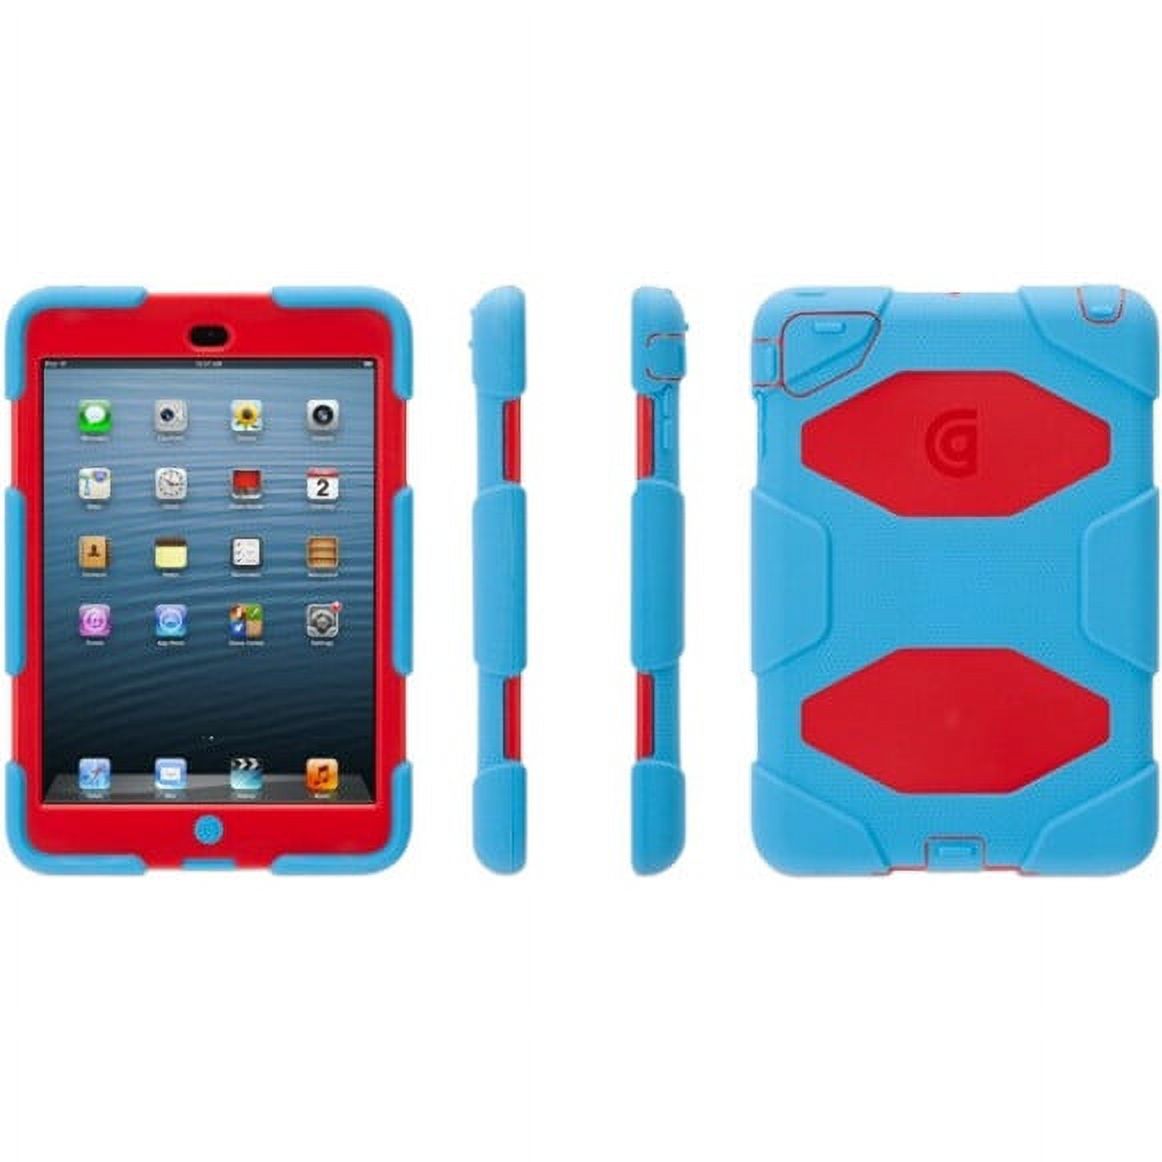 Griffin Survivor Carrying Case Apple iPad mini Tablet, Blue, Red - image 1 of 5